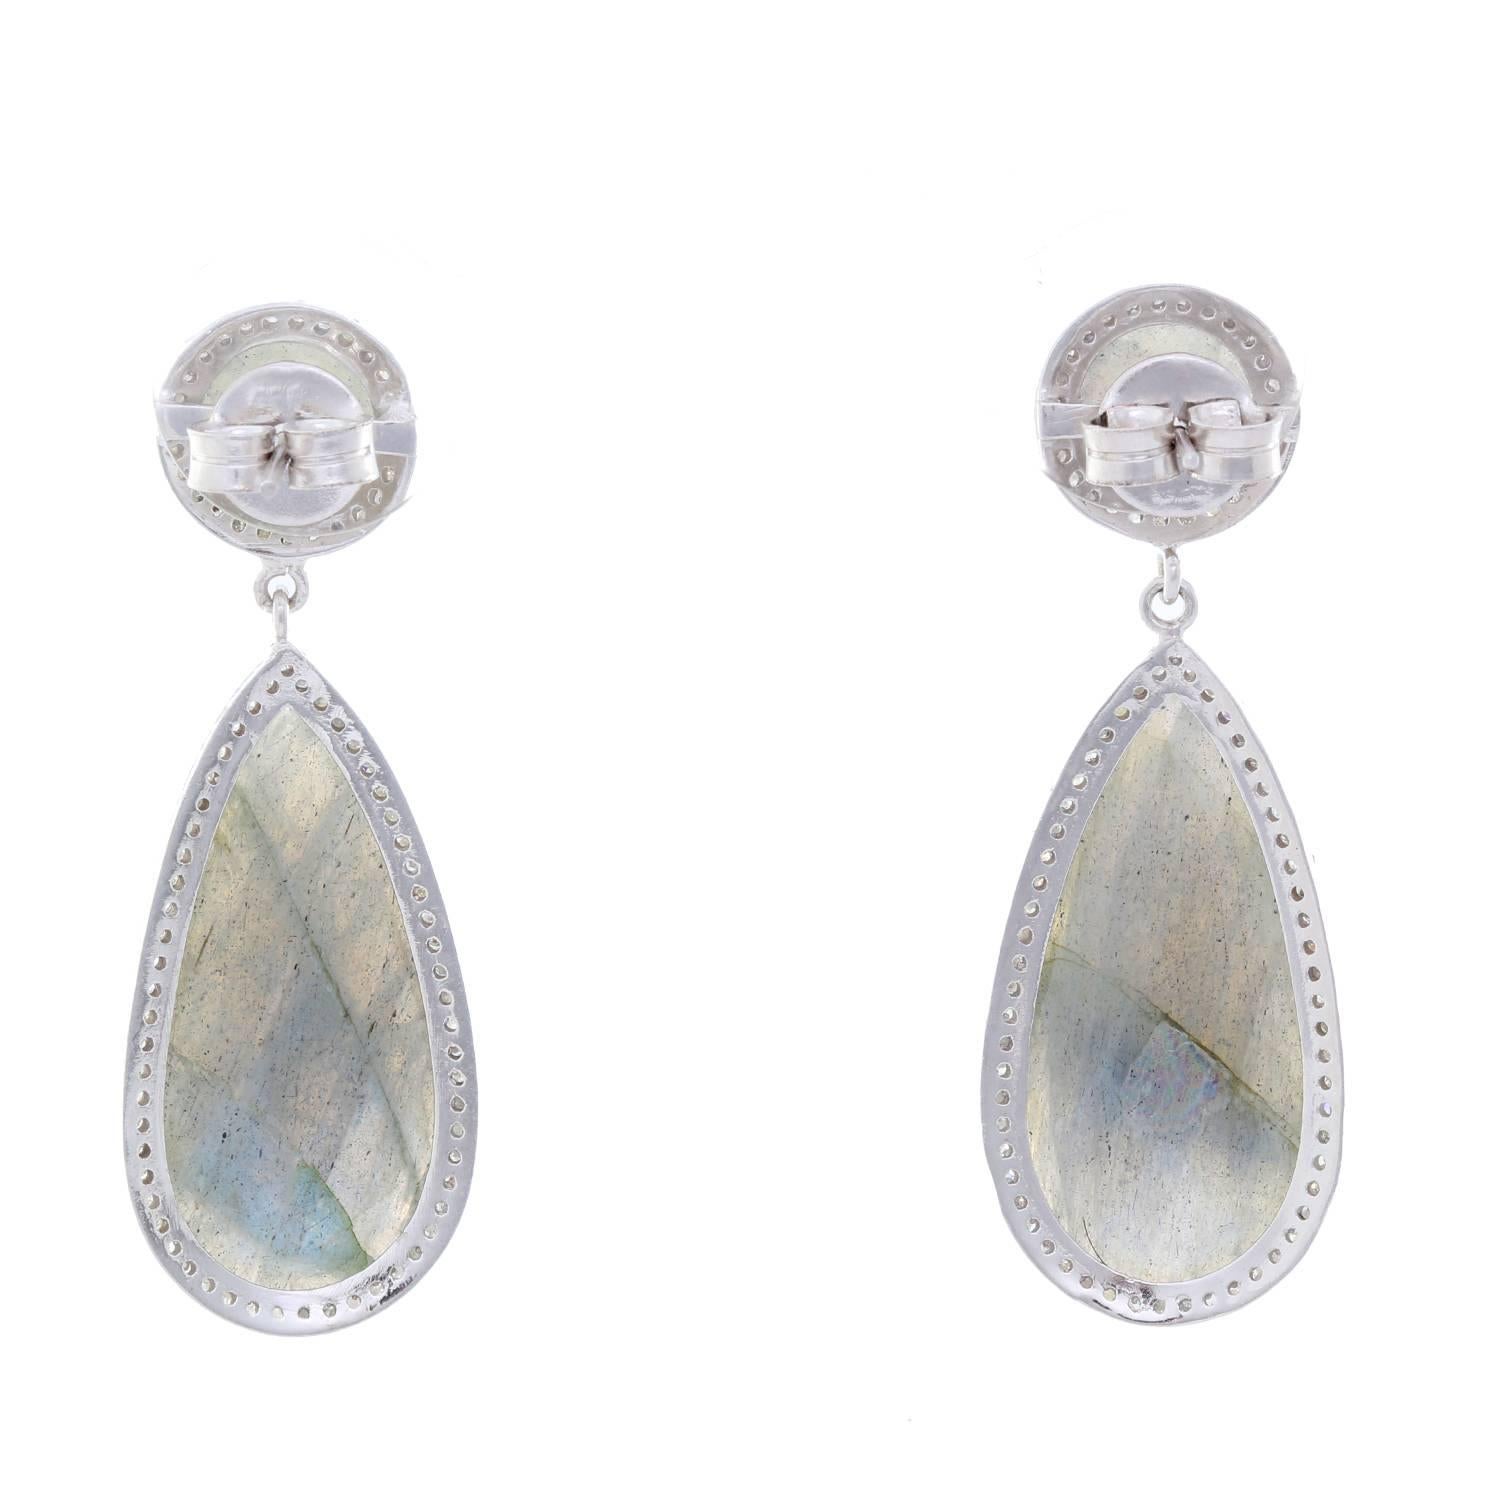 Stunning Sterling Silver Labradorite and Diamond  Dangle Earrings - . These stunning sliced Labradorite by a border of sparkling diamonds. Labradorite weight is 1.75 cts.   The earrings are large in size with the drop measuring apx. 1 1/2 inches in